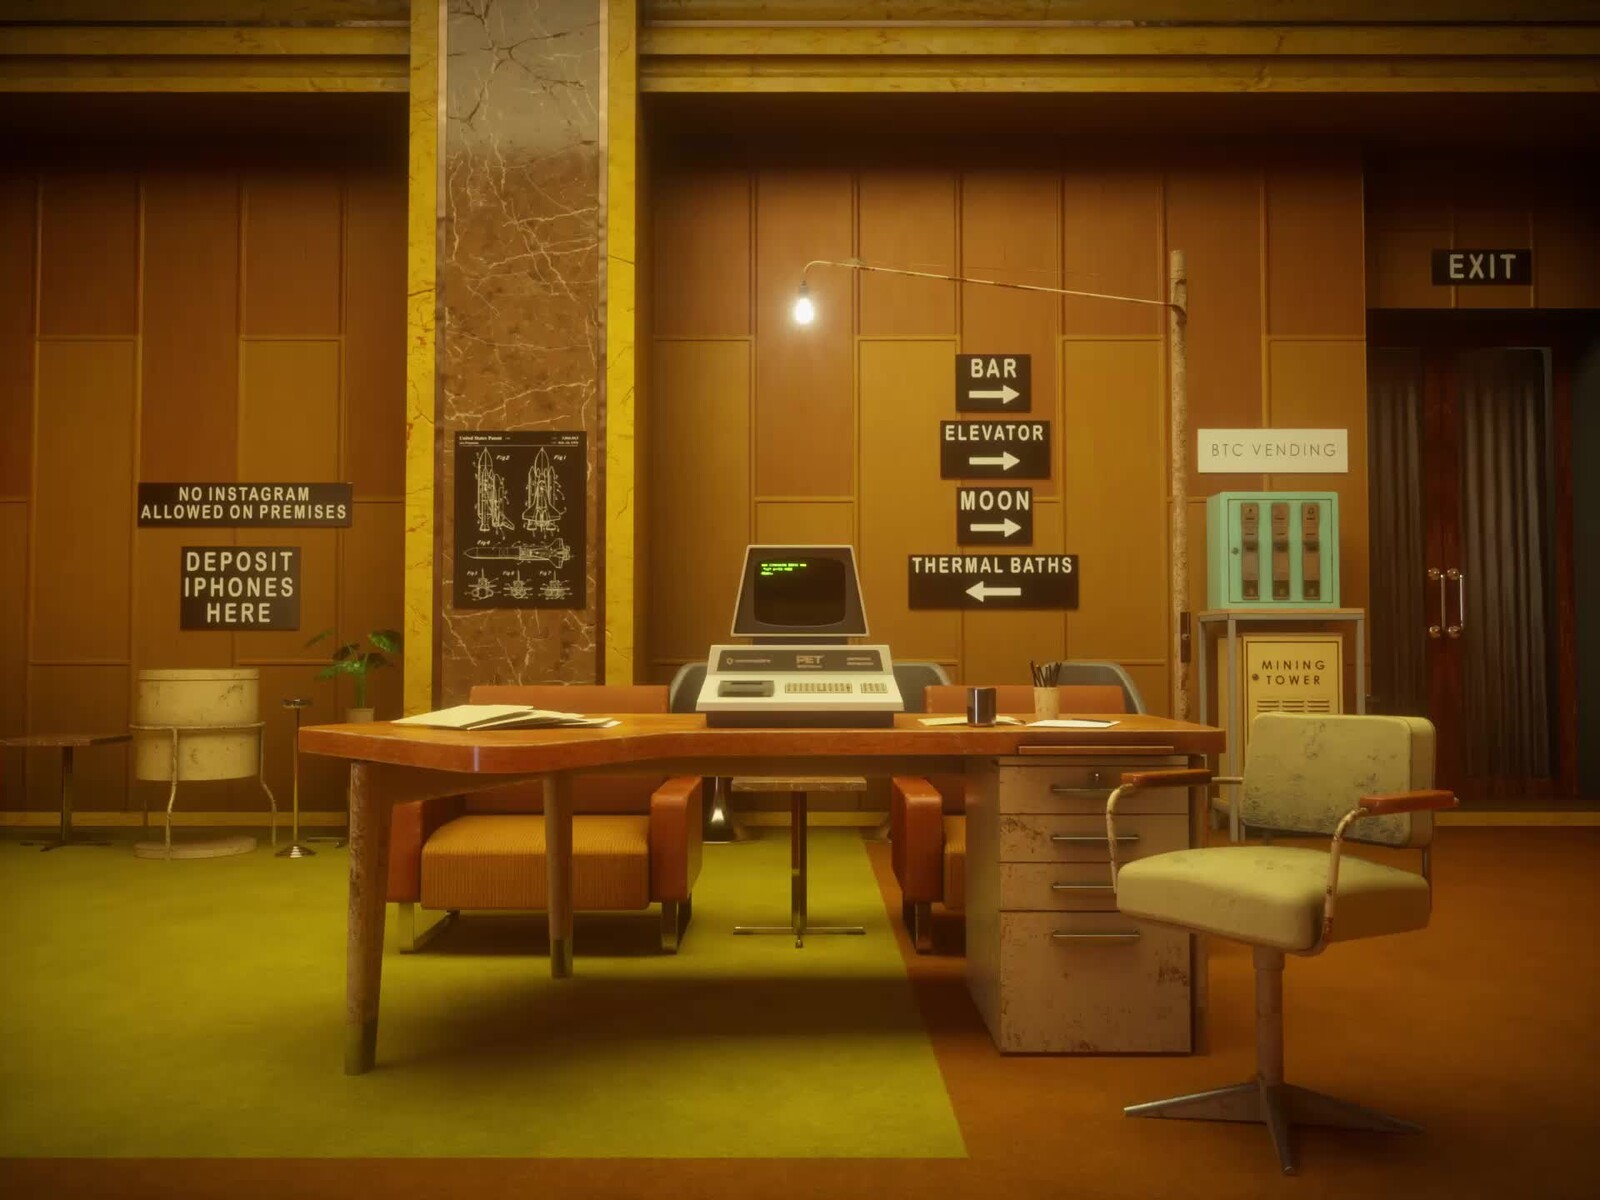 Space Age Office Design from 70s